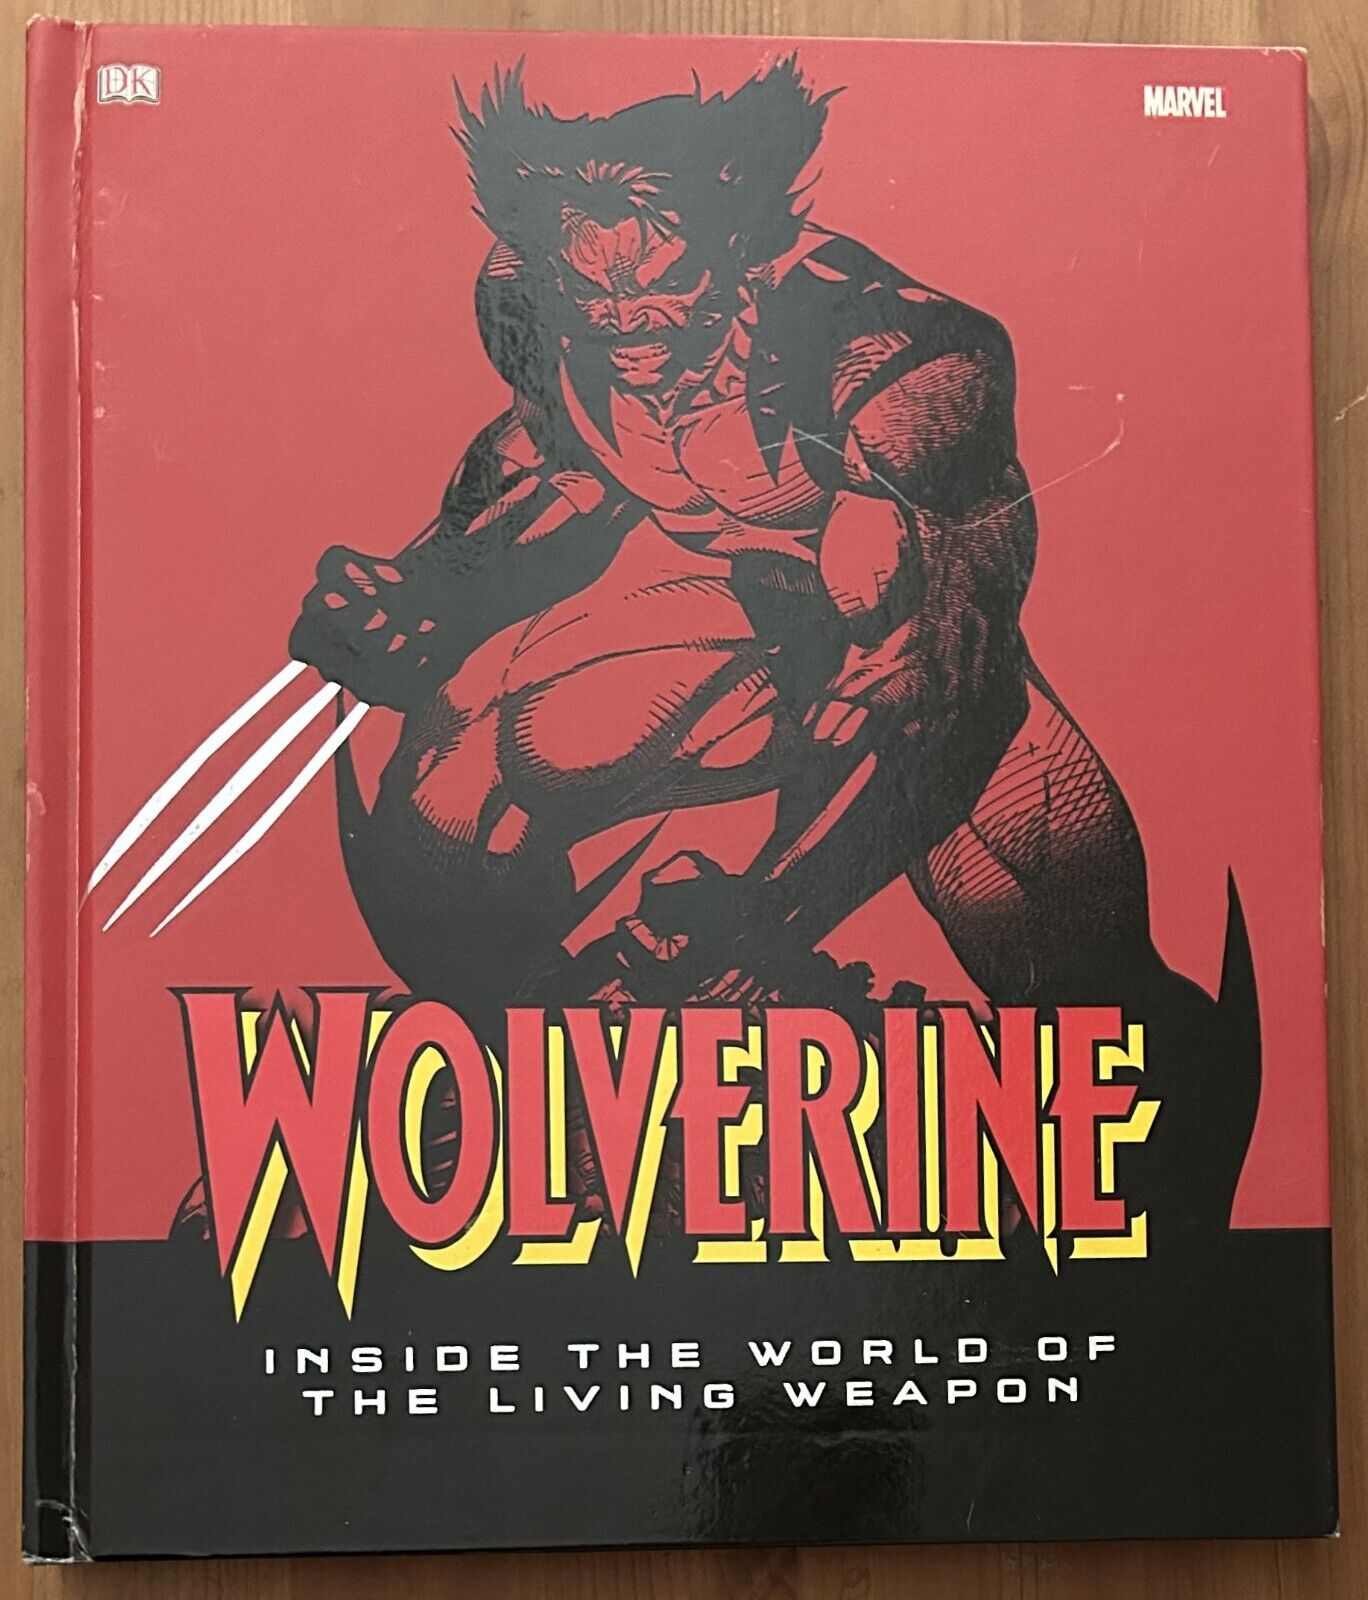 WOLVERINE: Inside the World of the Living Weapon (DK 2009, HC)